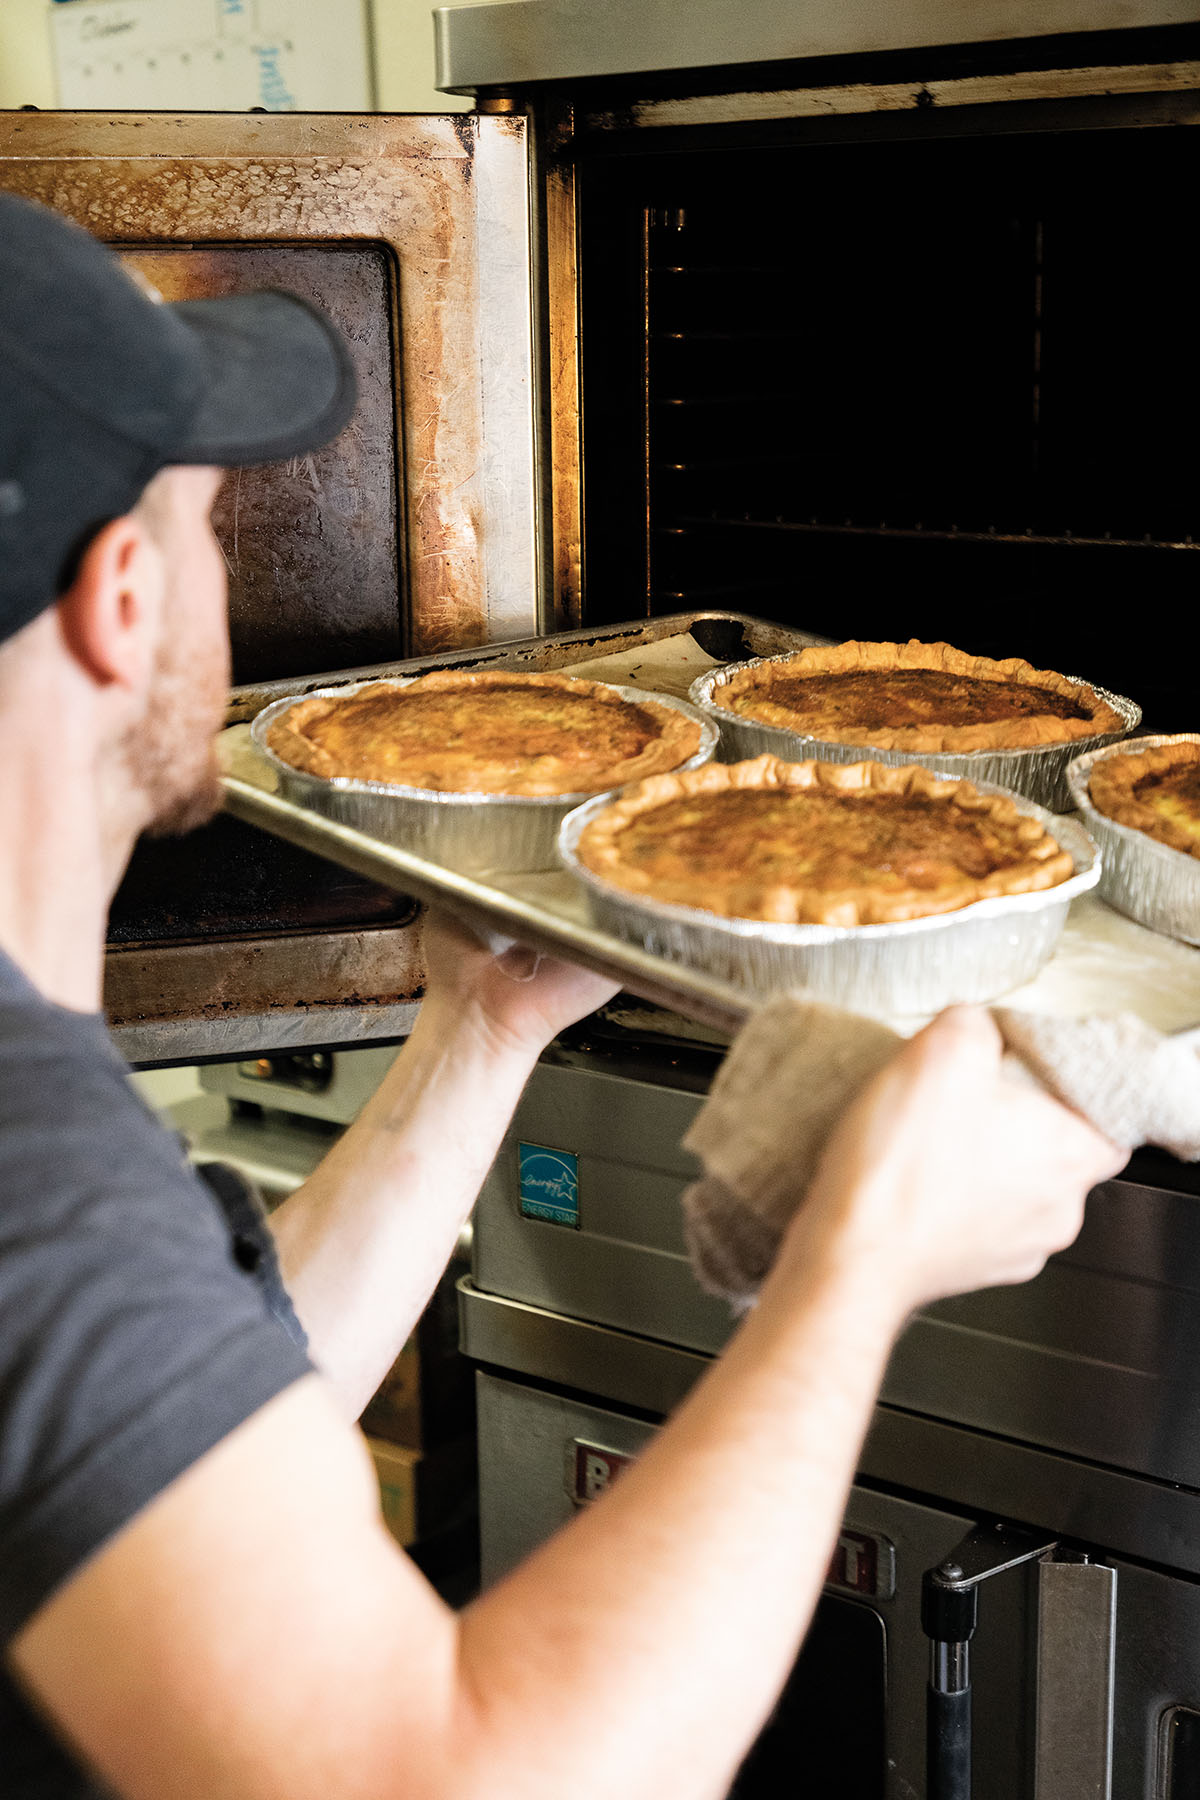 A man carefully loads pies into a warming drawer on a silver baking sheet